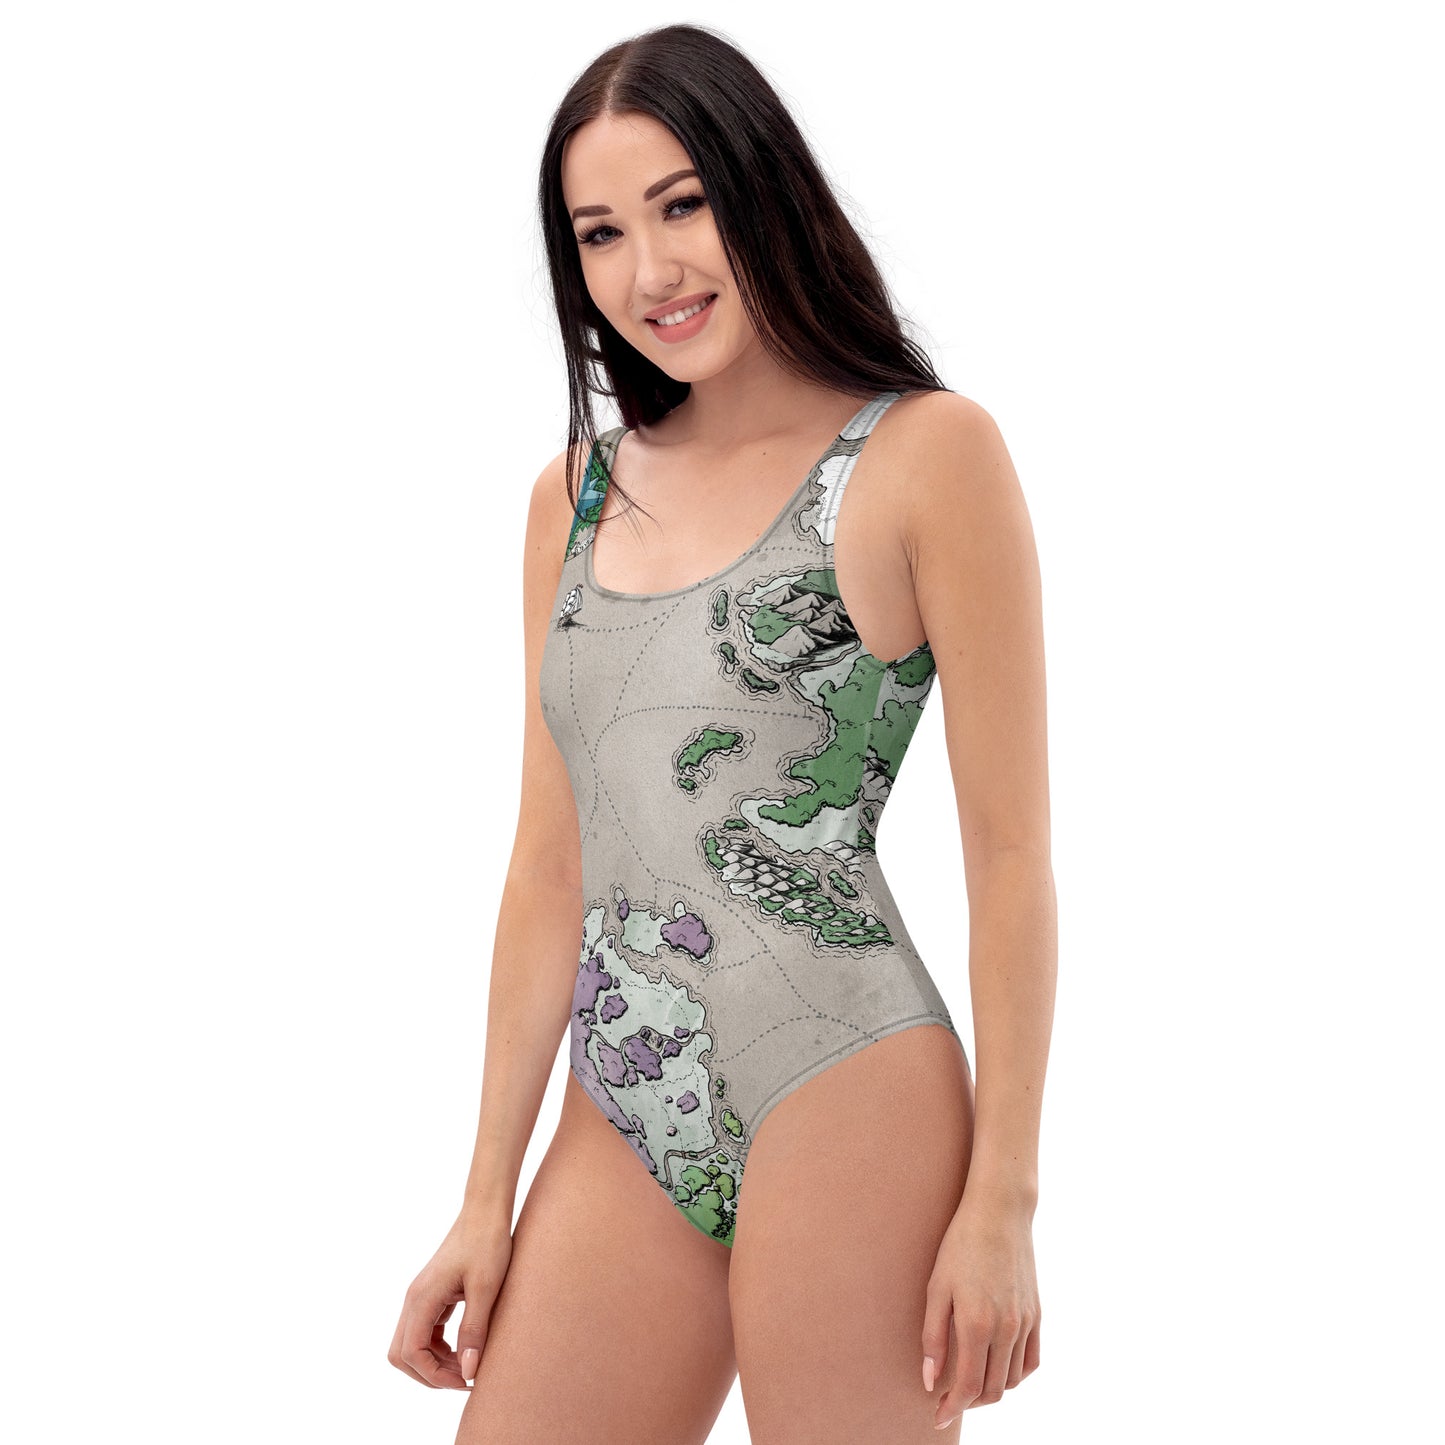 A model wears the Ortheiad map one piece swimsuit by Deven Rue, left view.